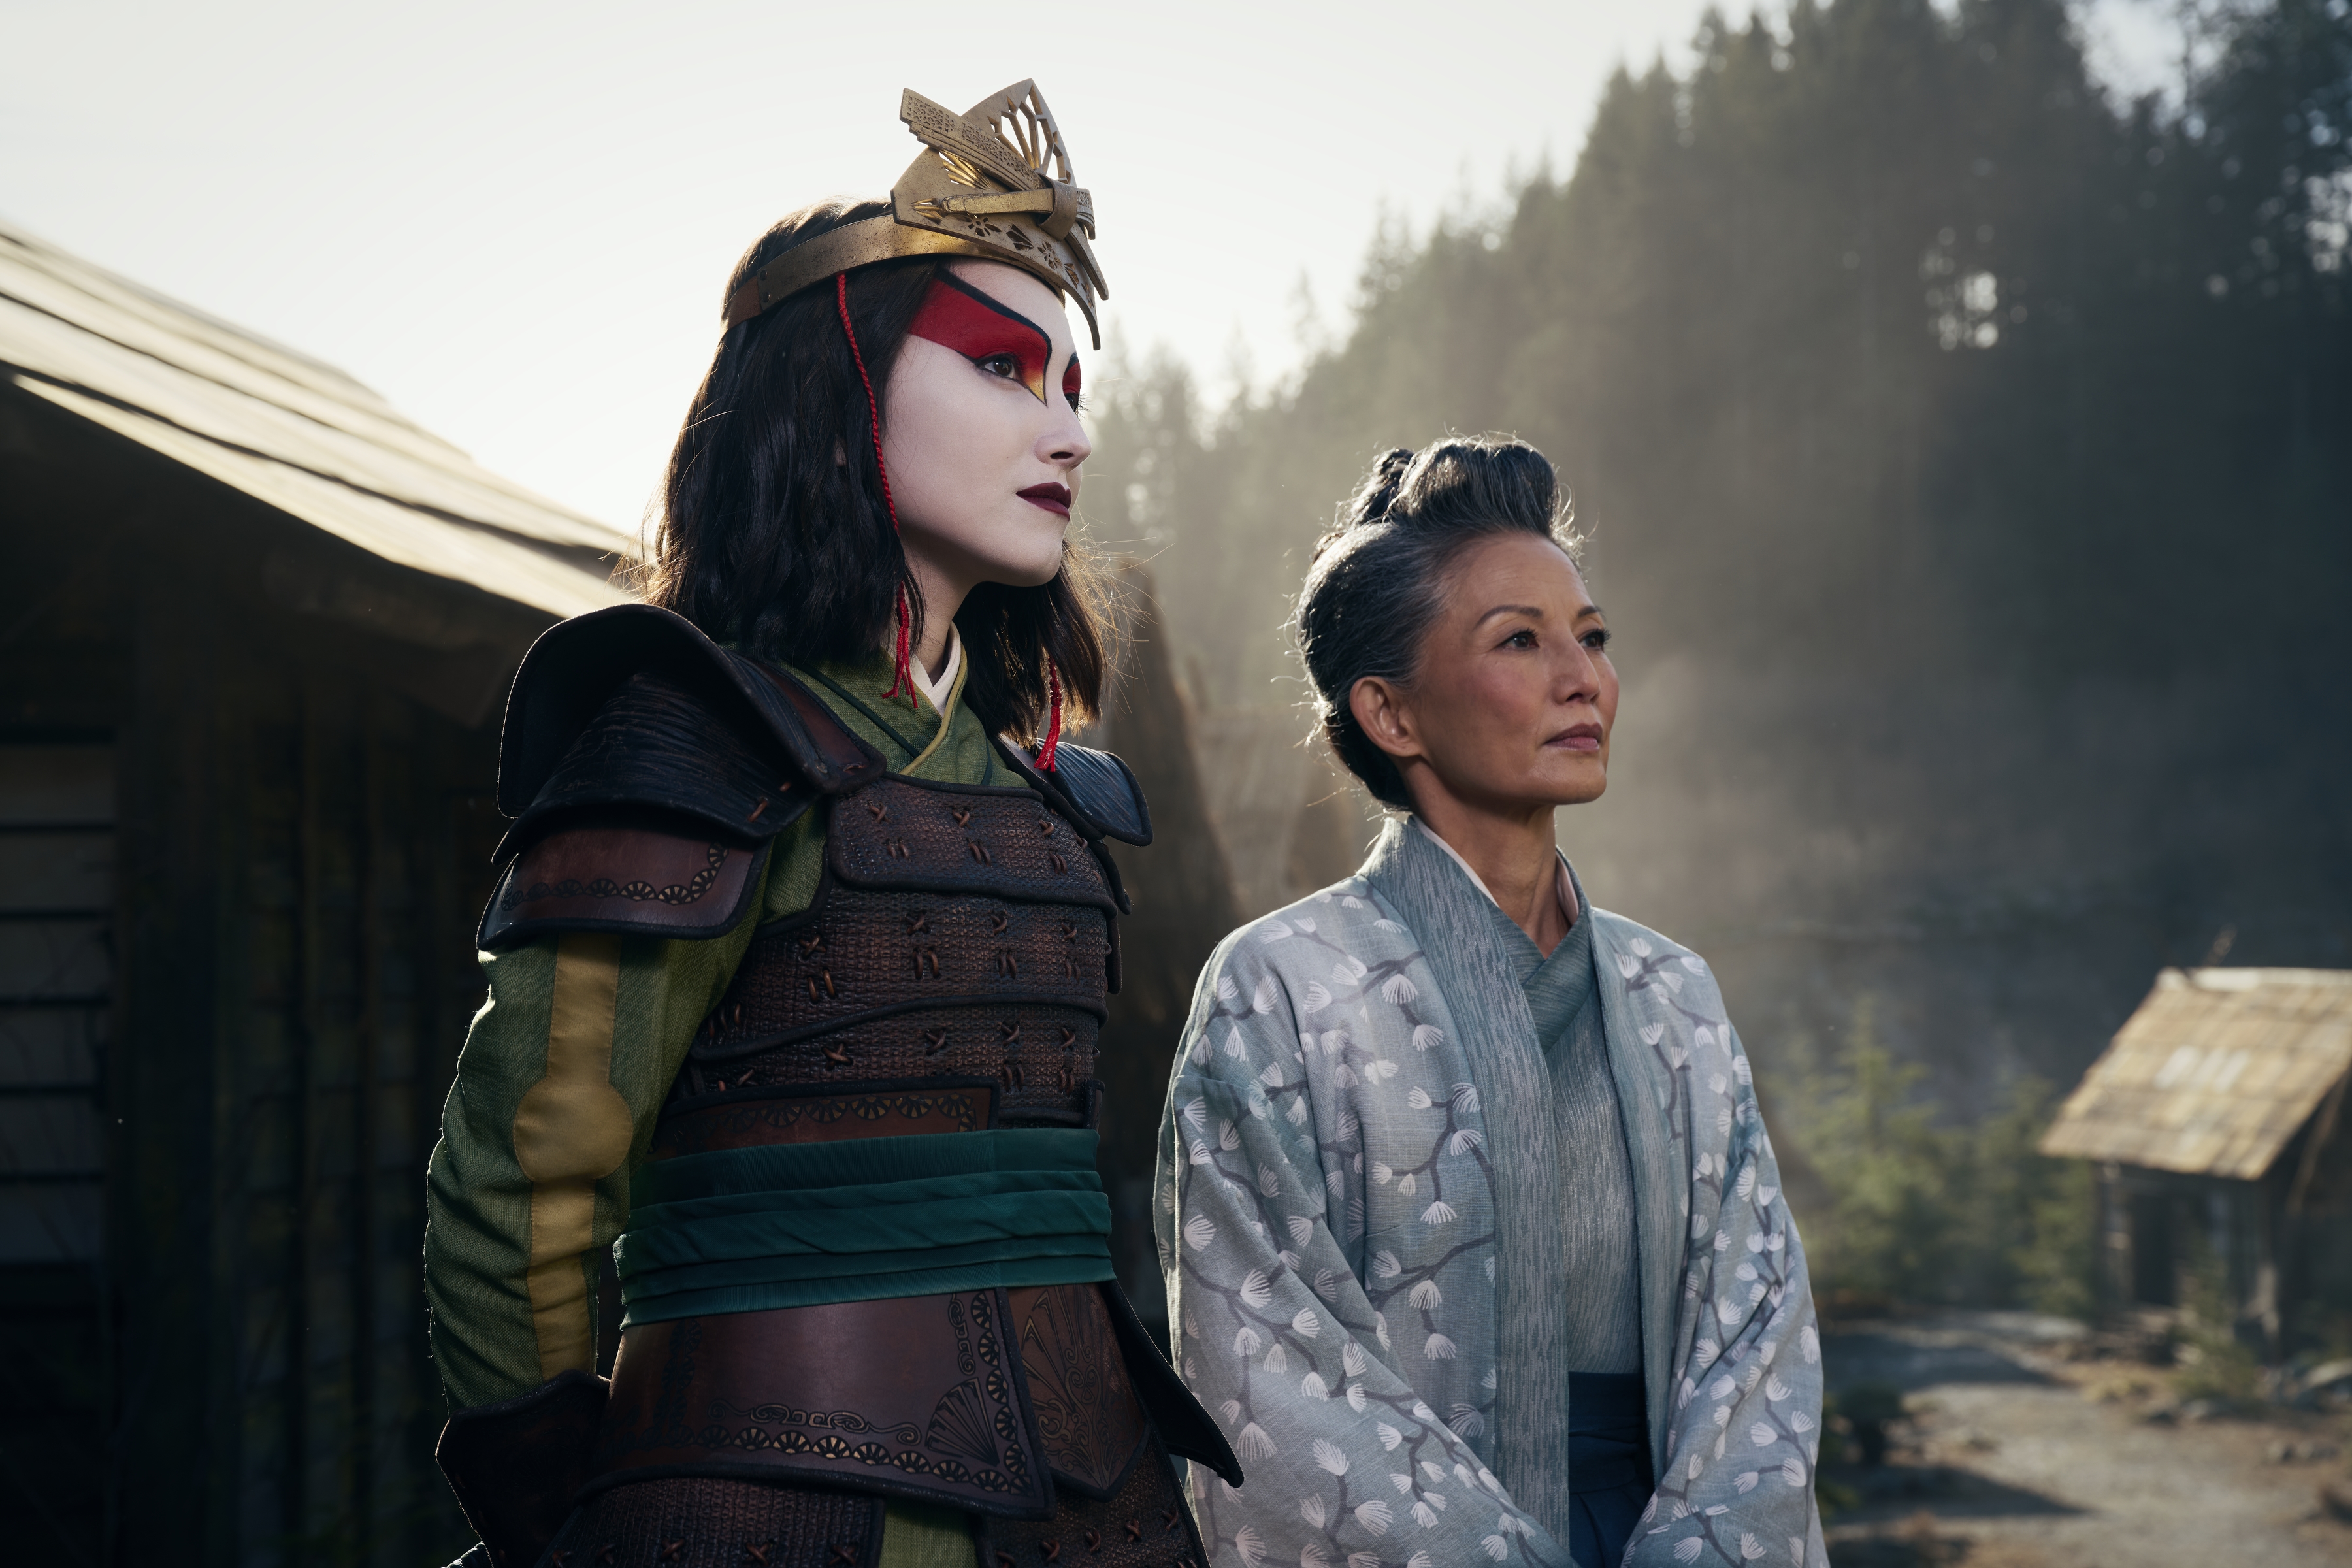 Suki from the live-action version of Avatar: The Last Airbender in full Kyoshi Warrior getup, standing next to Mayor Yukari